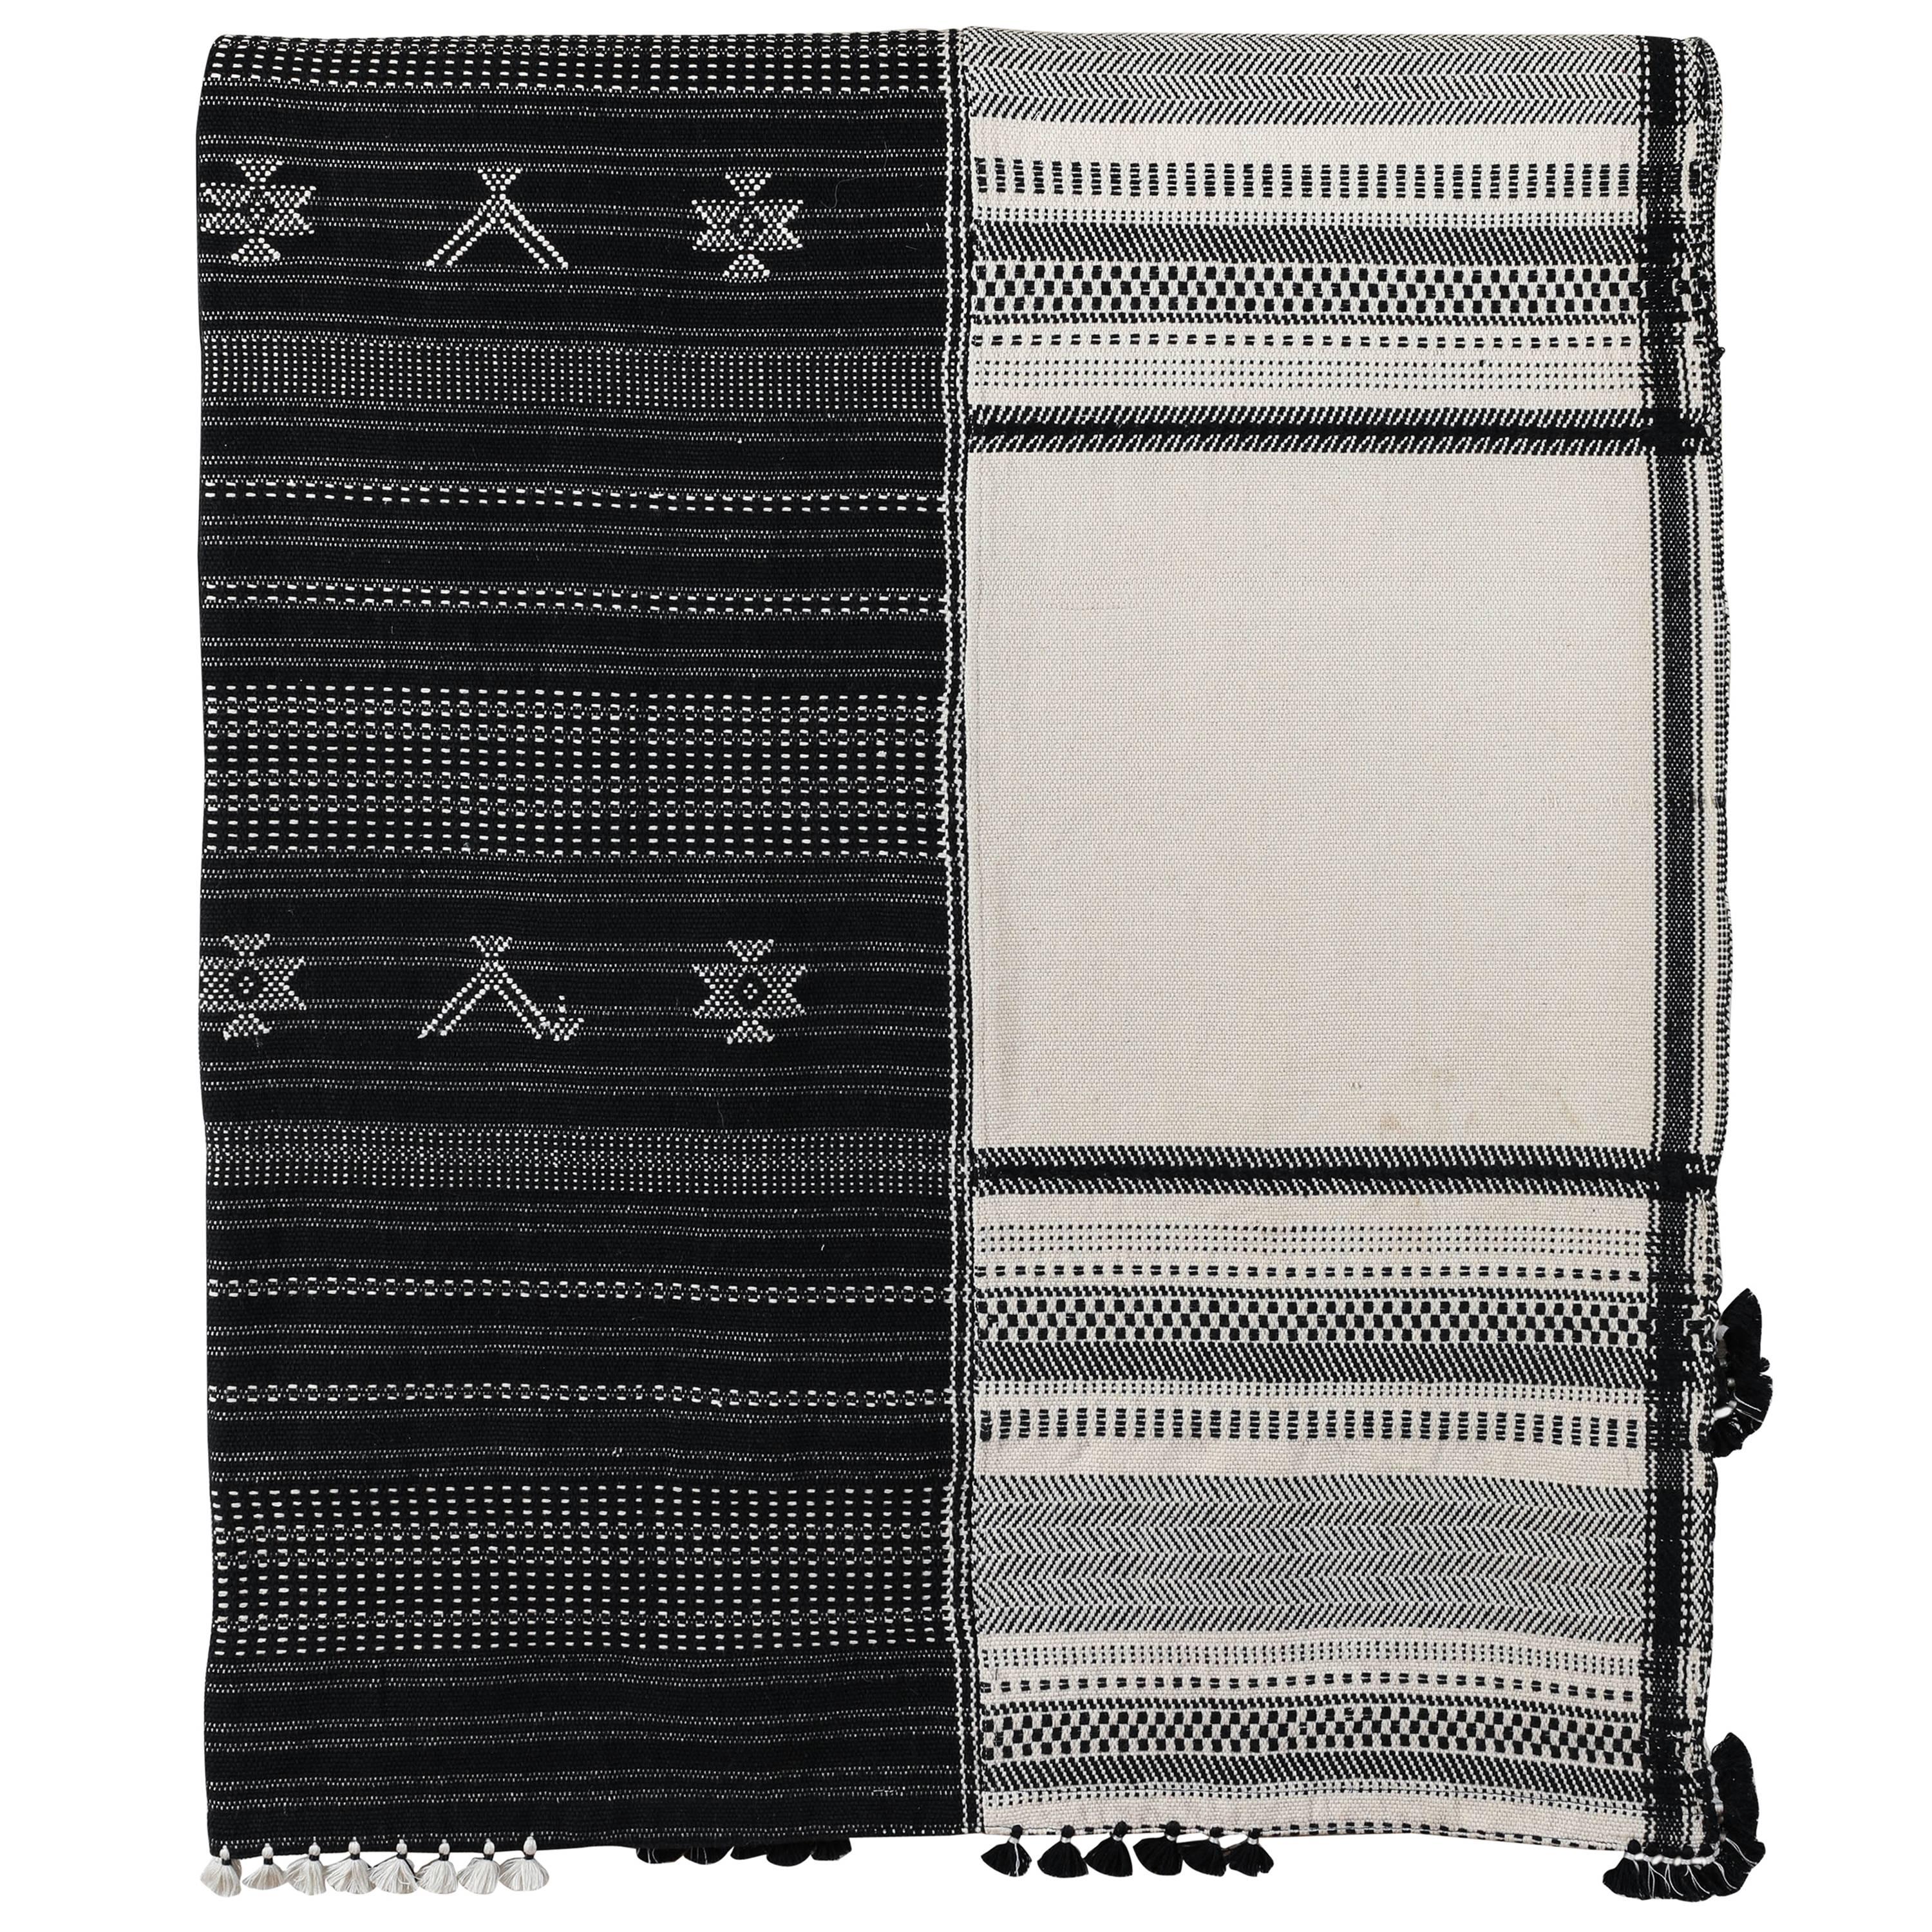 Injri Organic Cotton Black and White Bedcover or Throw For Sale